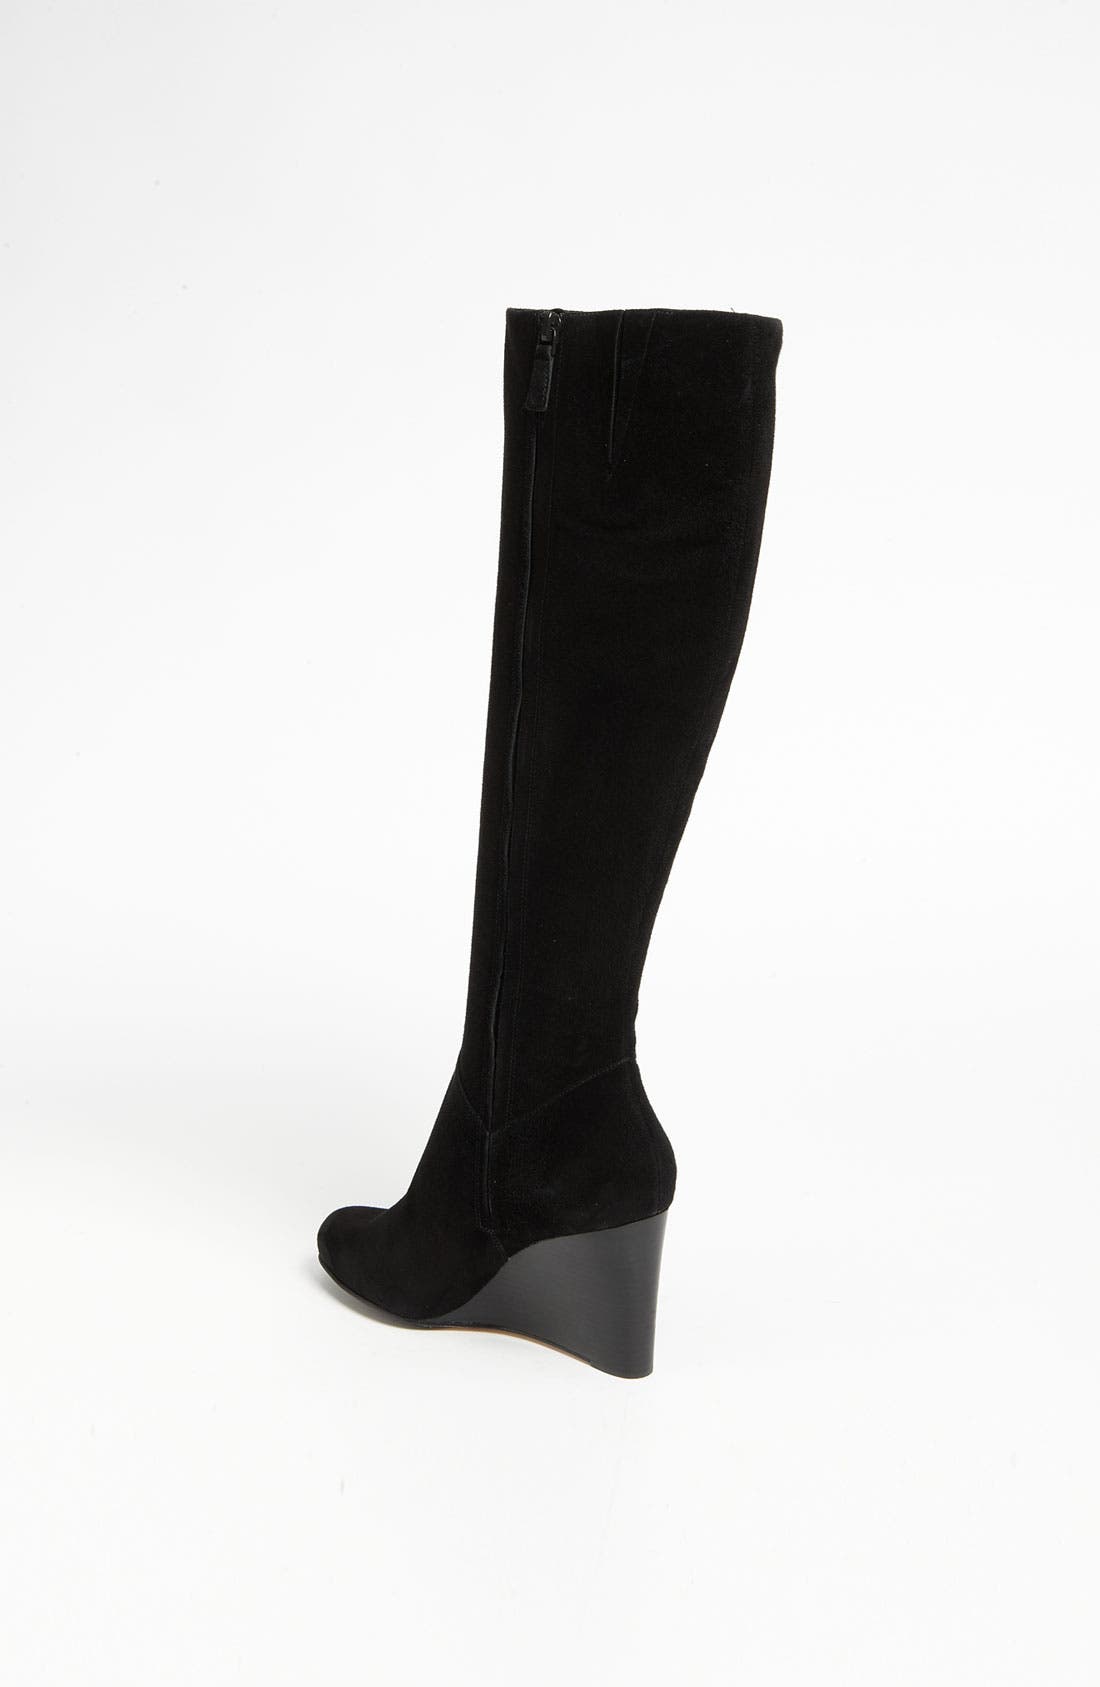 cole haan cora riding boot